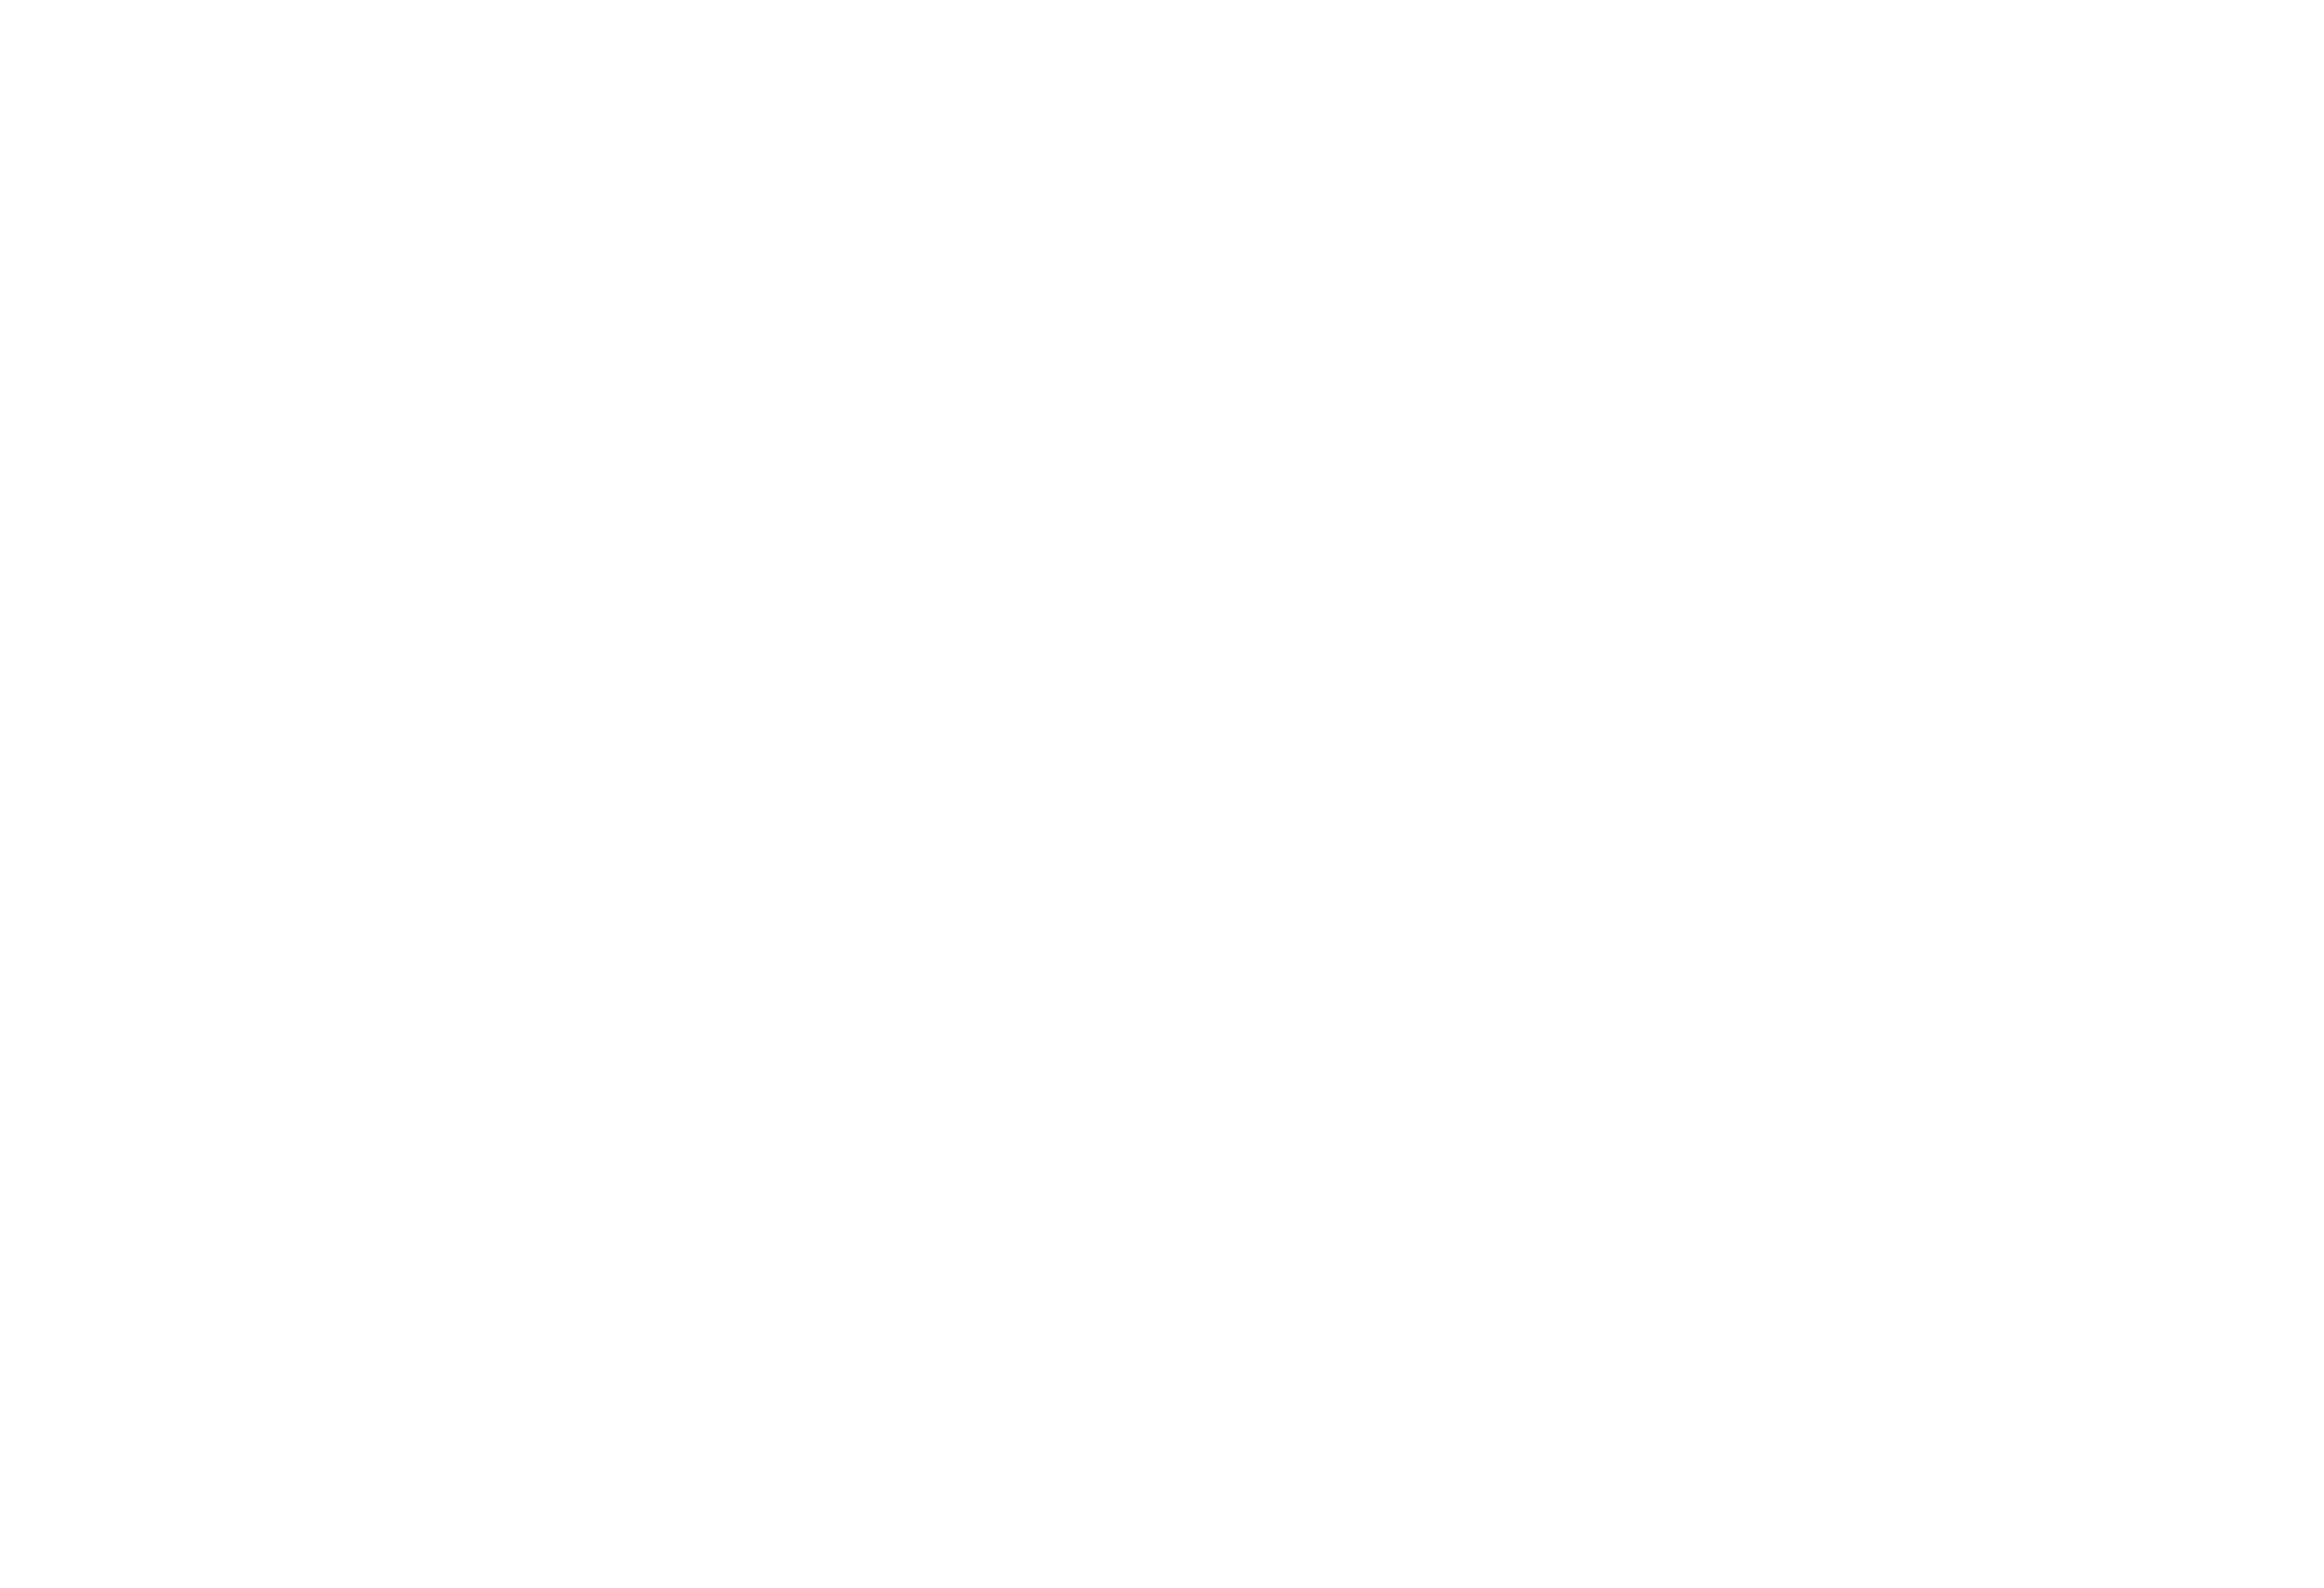 Countryside logo in white